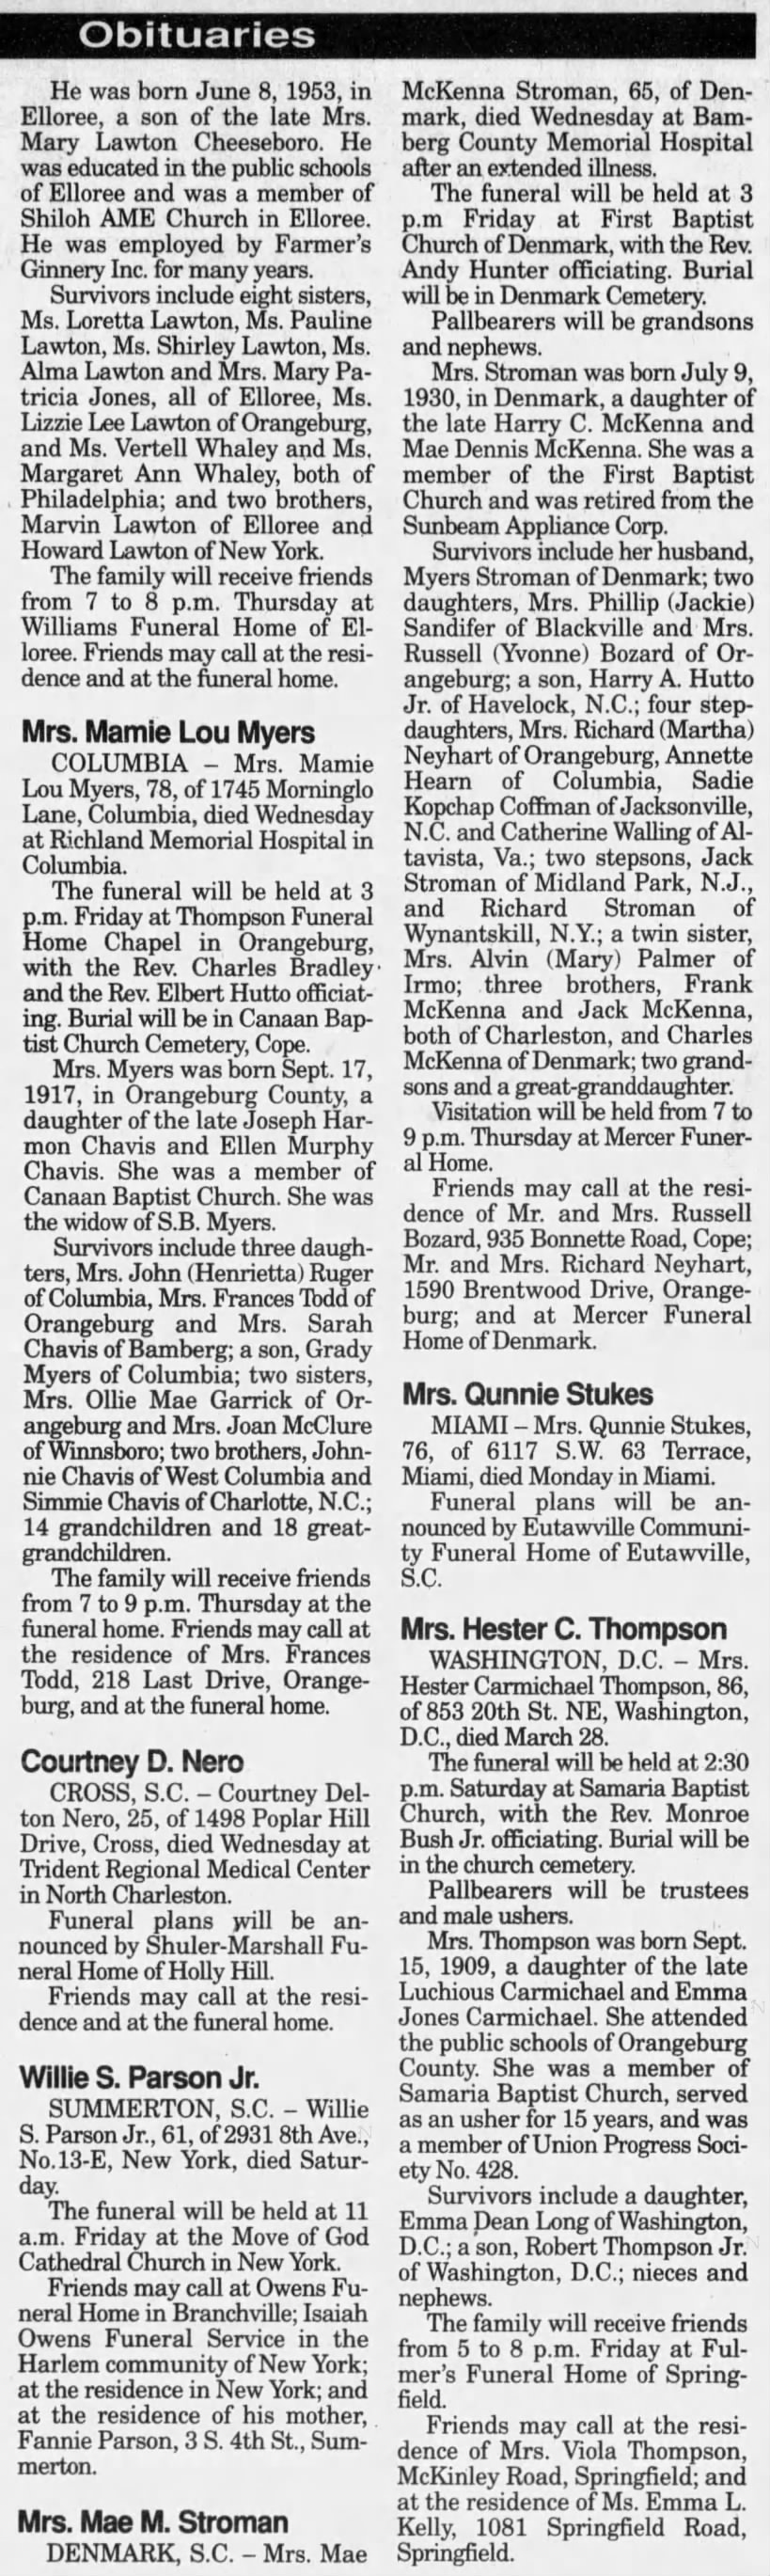 Obituary Mrs. Mae McKenna Stroman (bottom of 1st column and top of 2nd)